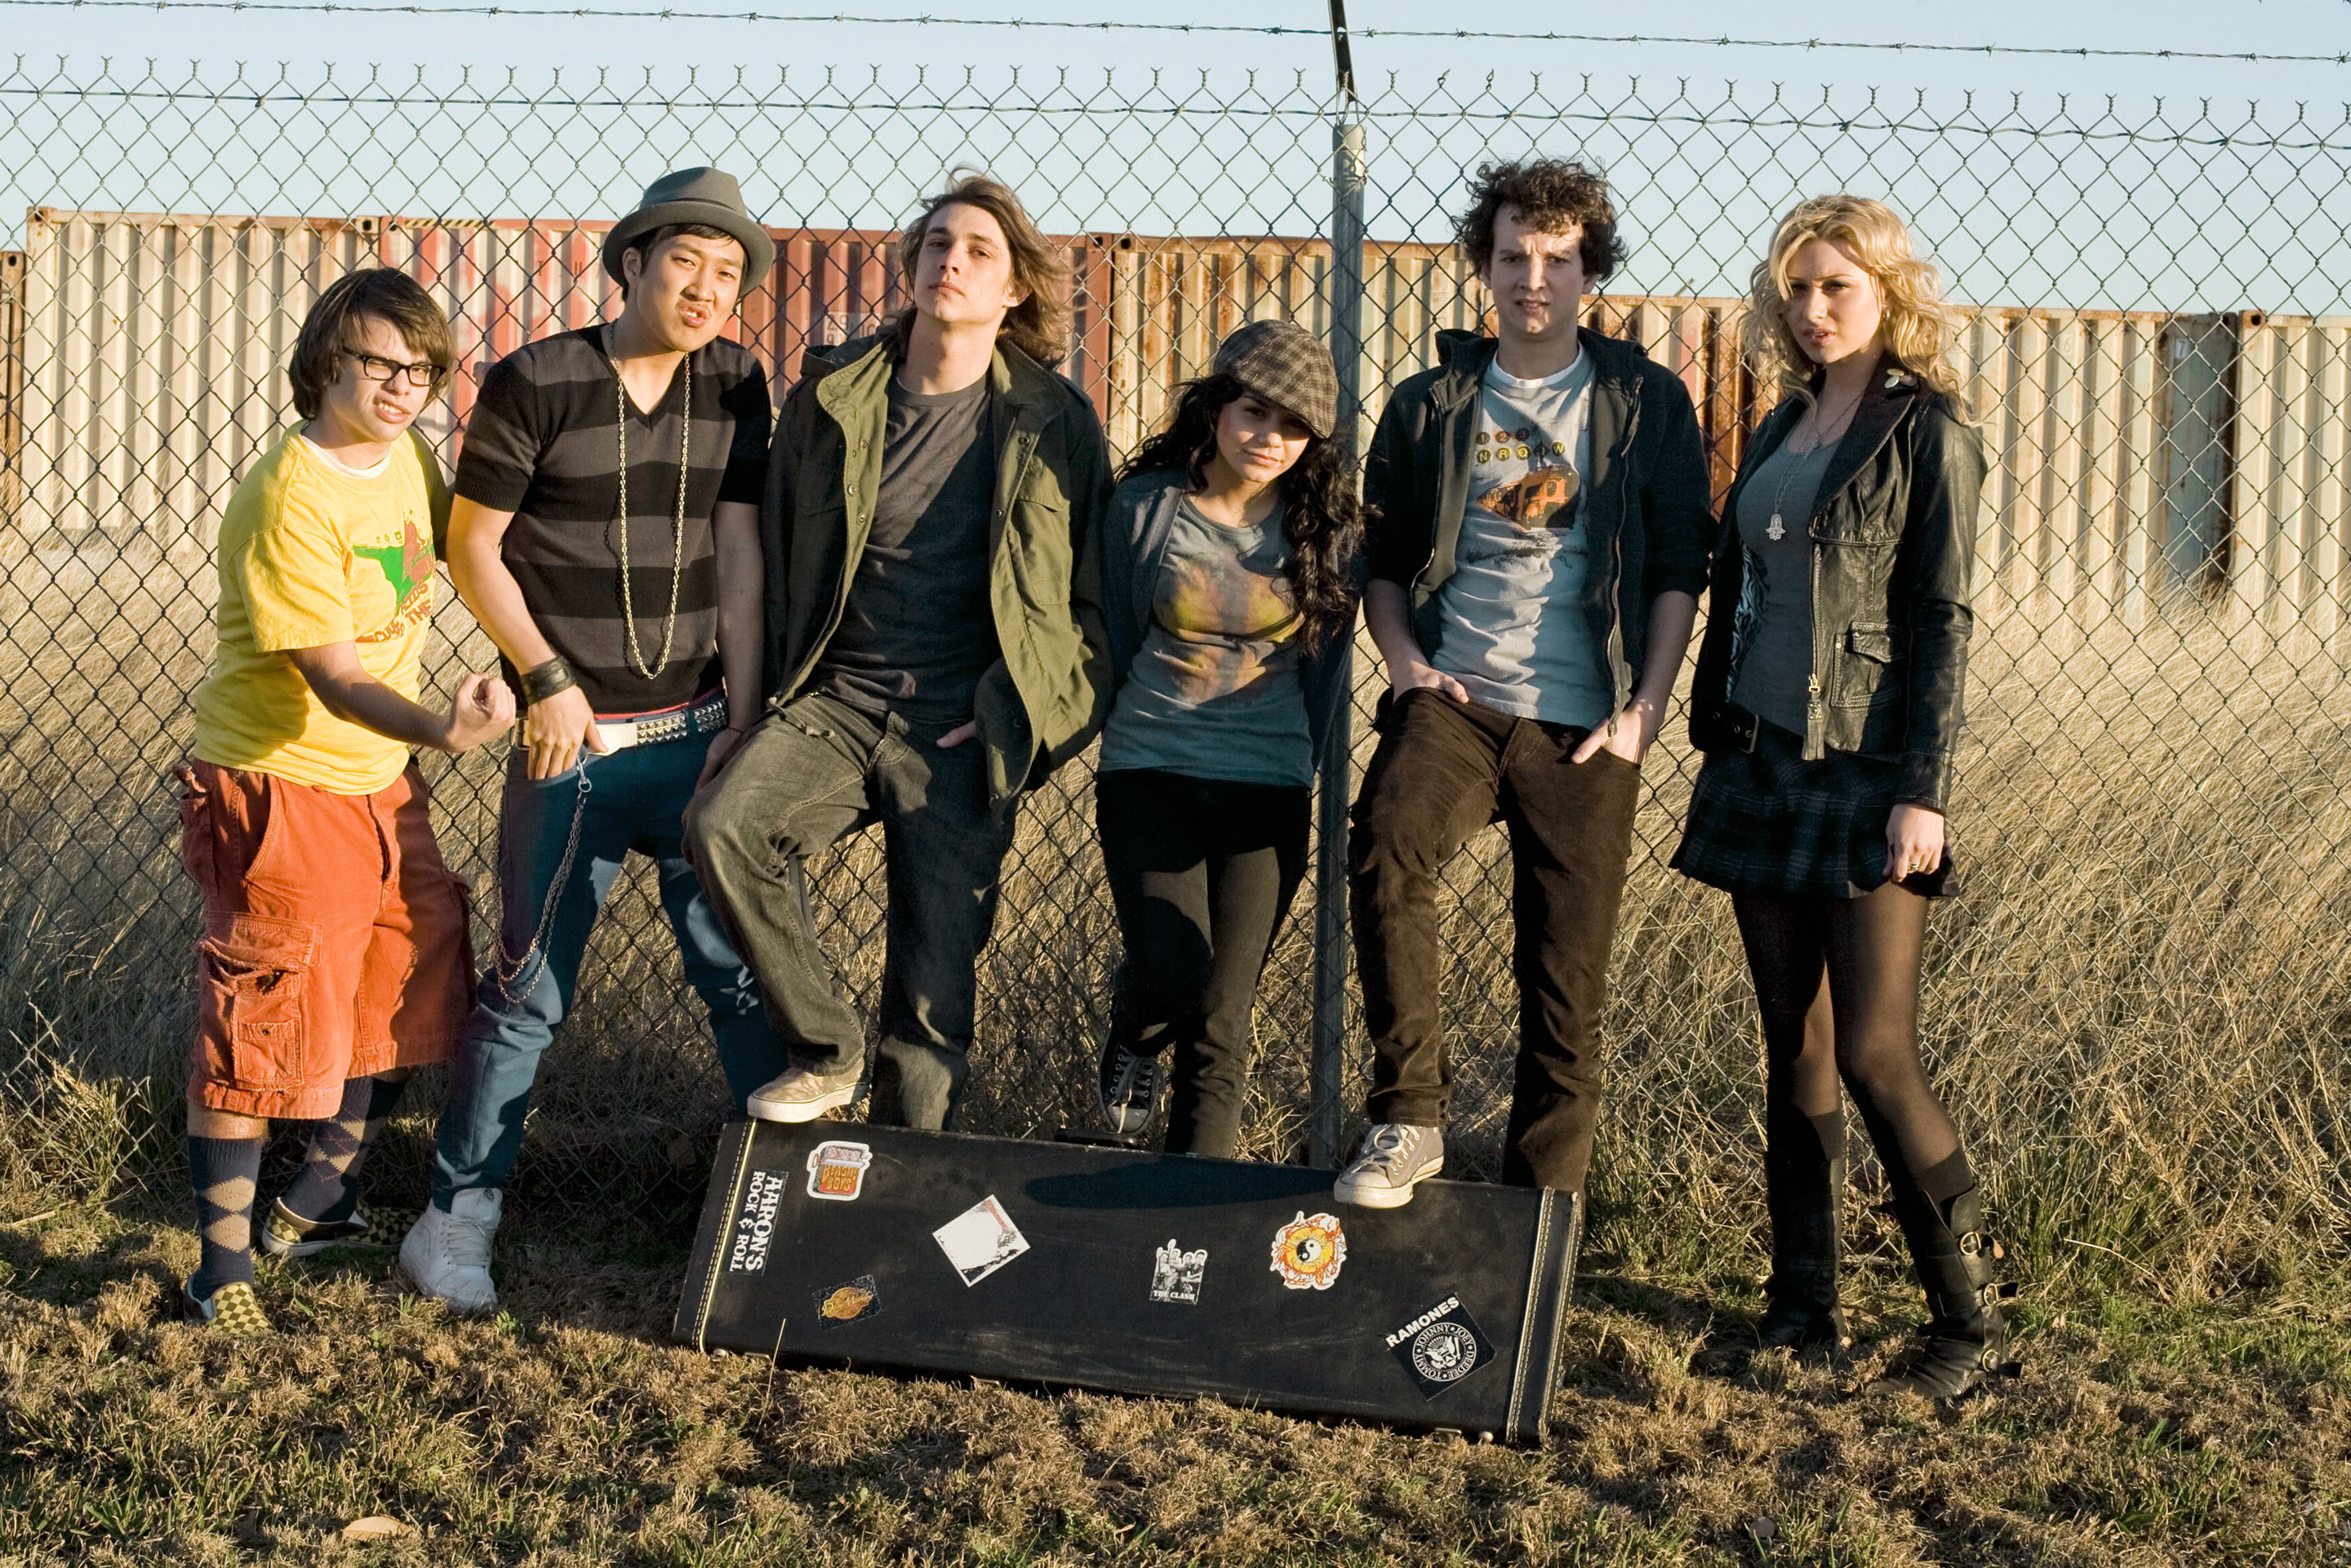 Charlie Saxton, Tim Jo, Ryan Donowho, Vanessa Hudgens, Gaelan Connell, and Alyson Michalka pose for a band picture